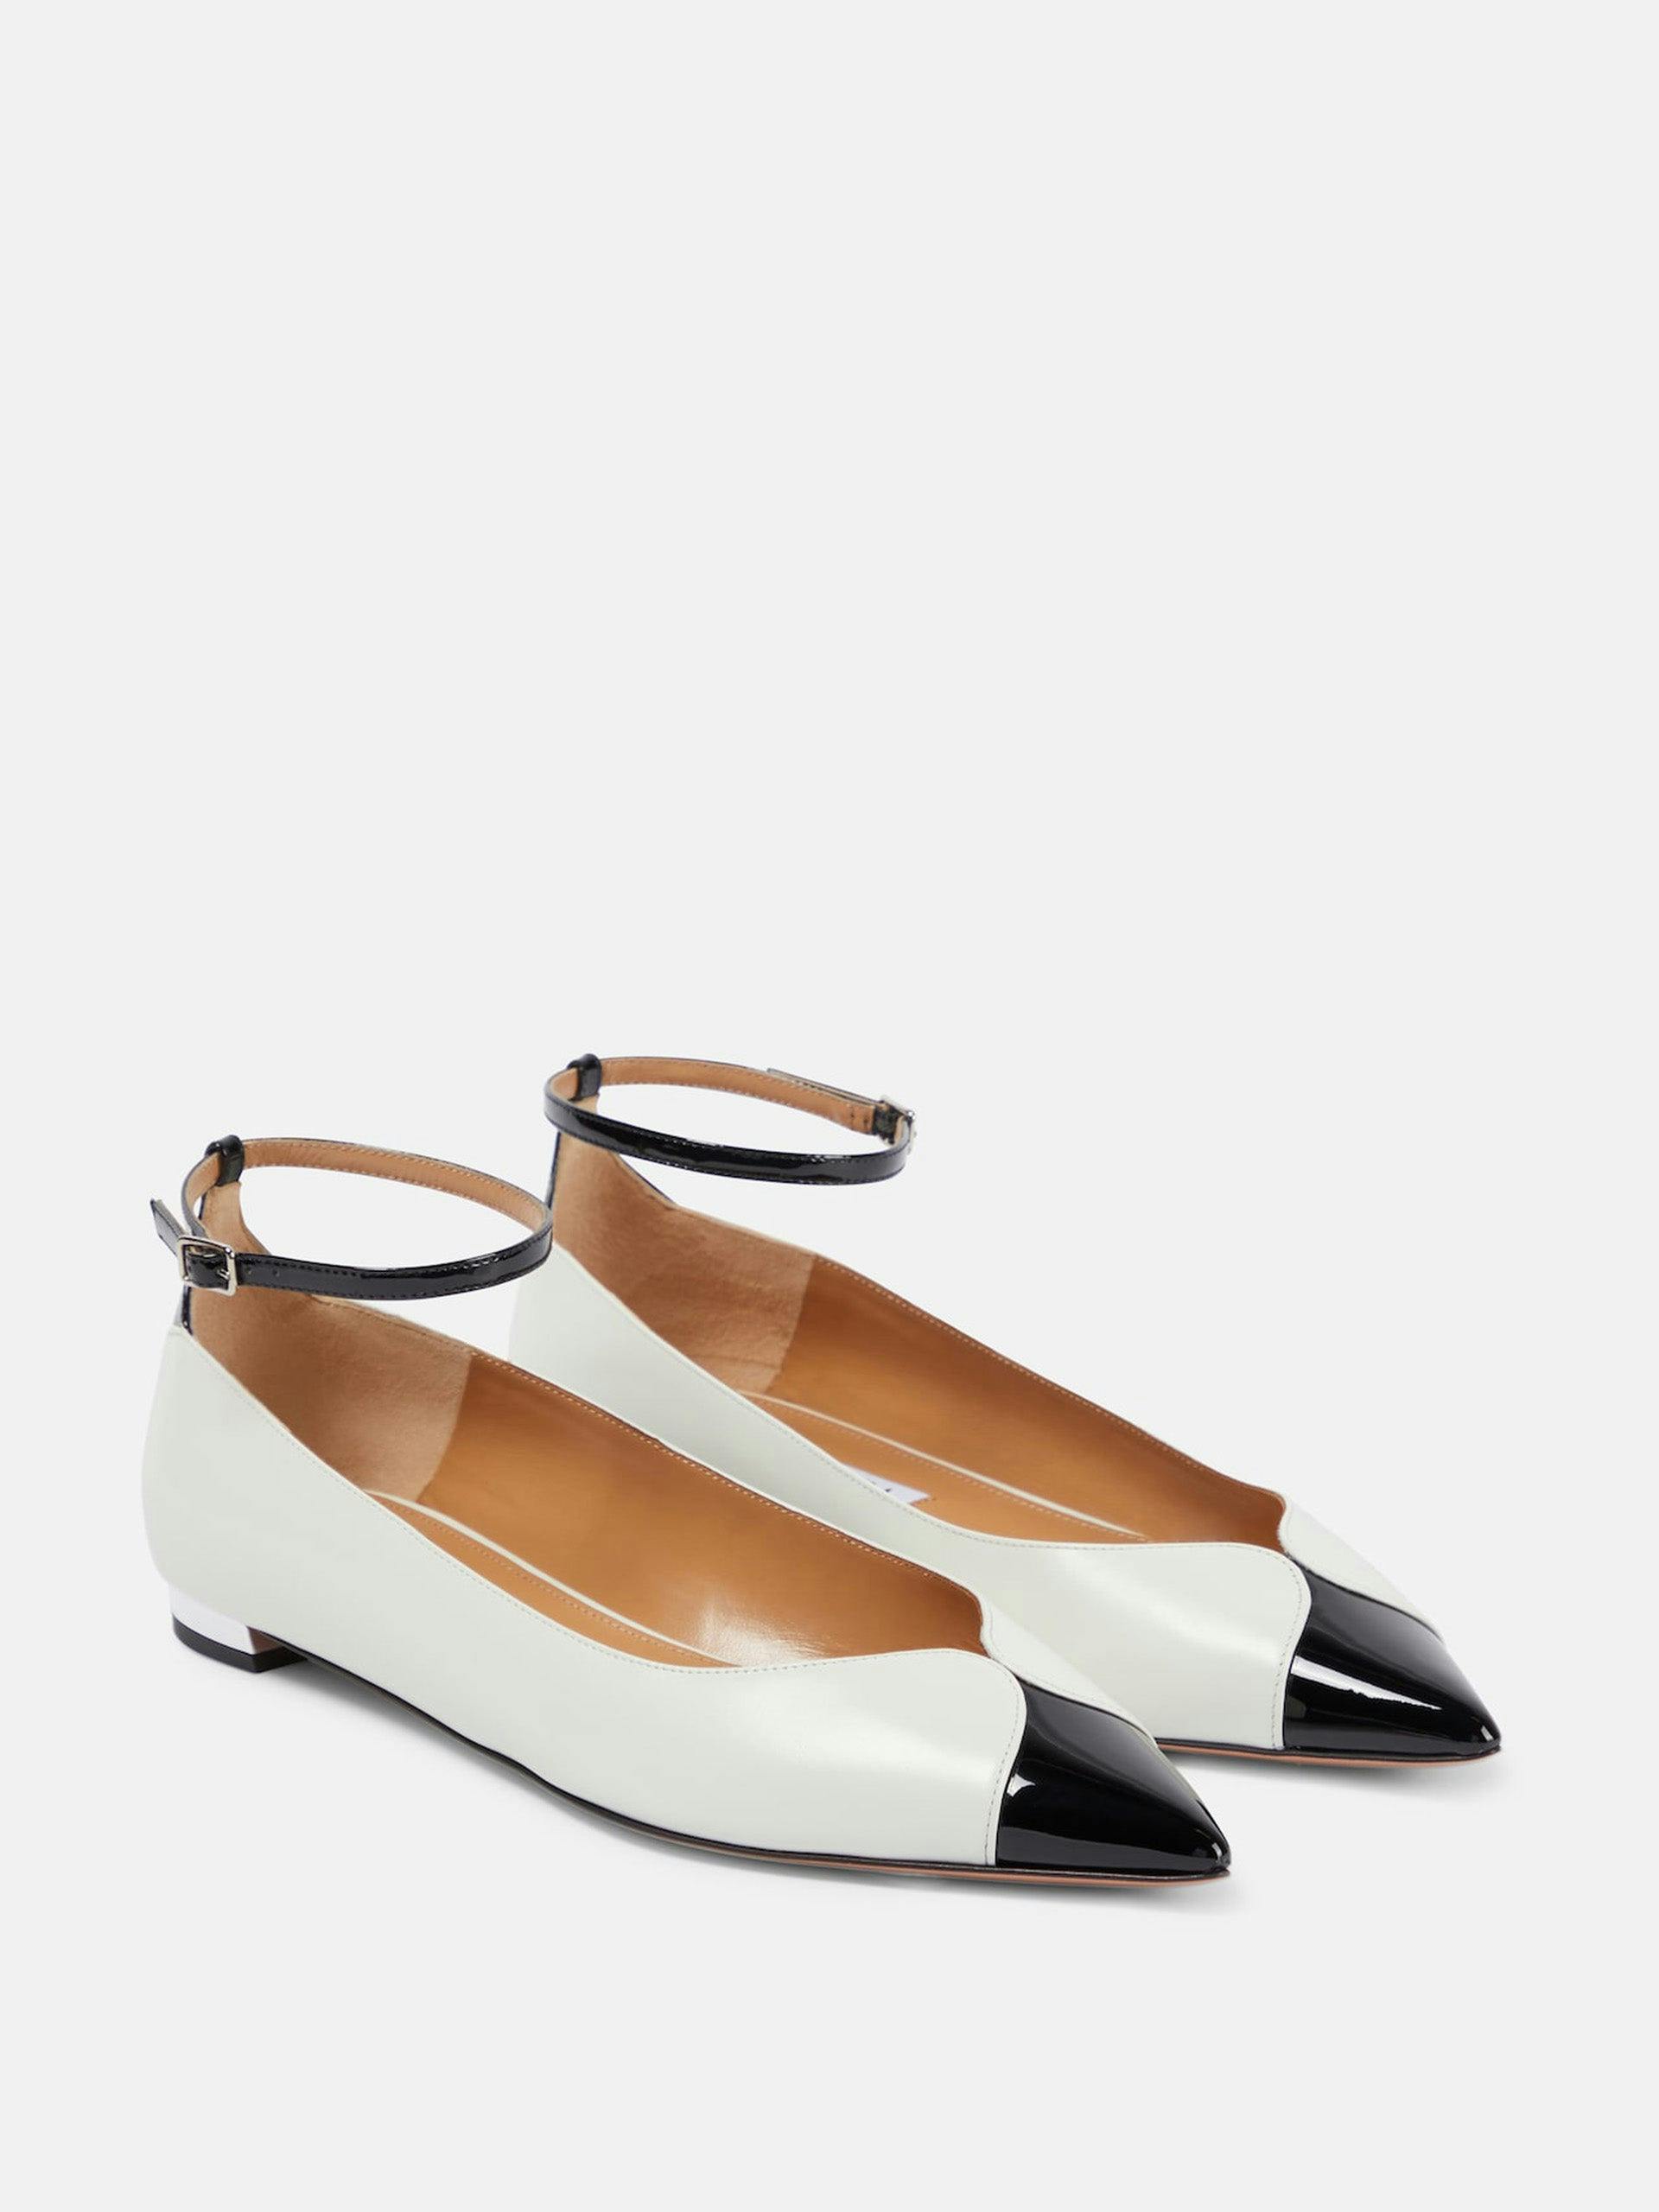 Pinot patent leather ballet flats